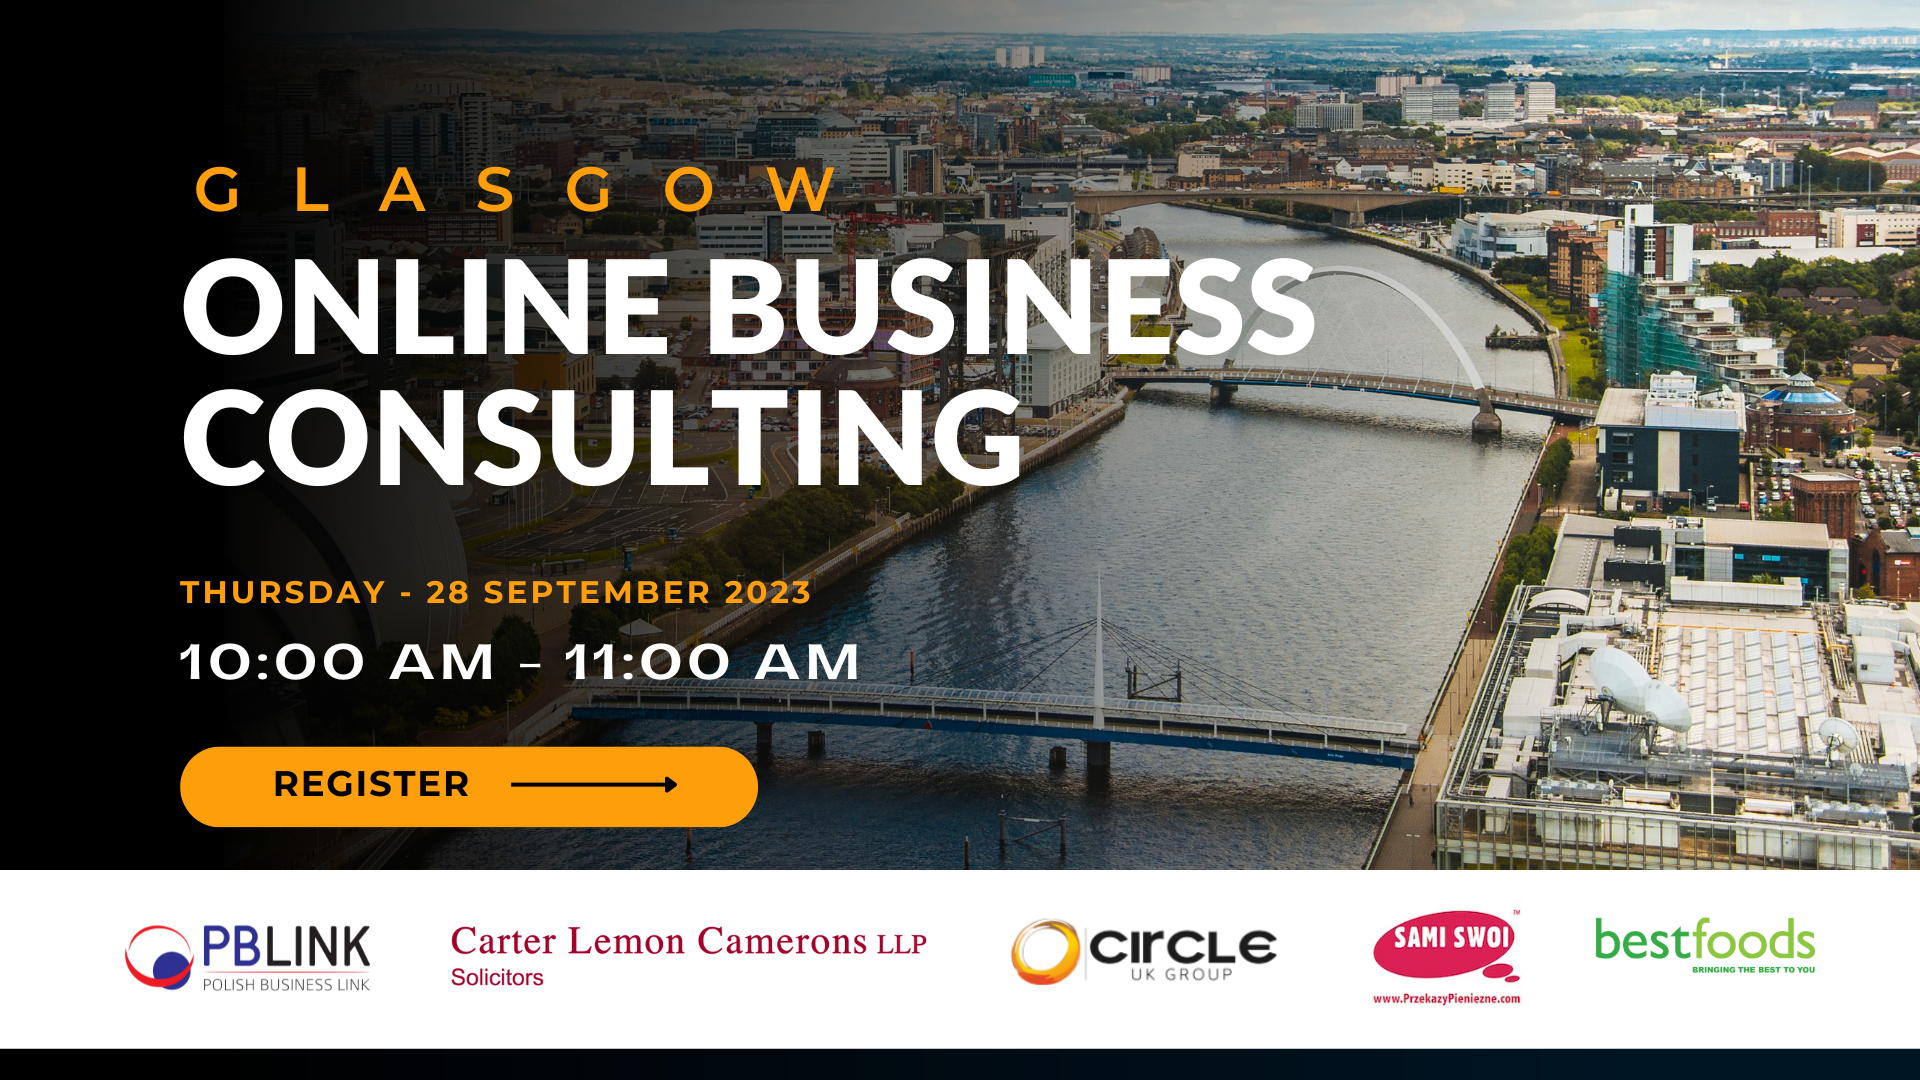 Polish Business Link Online business Consulting Glasgow